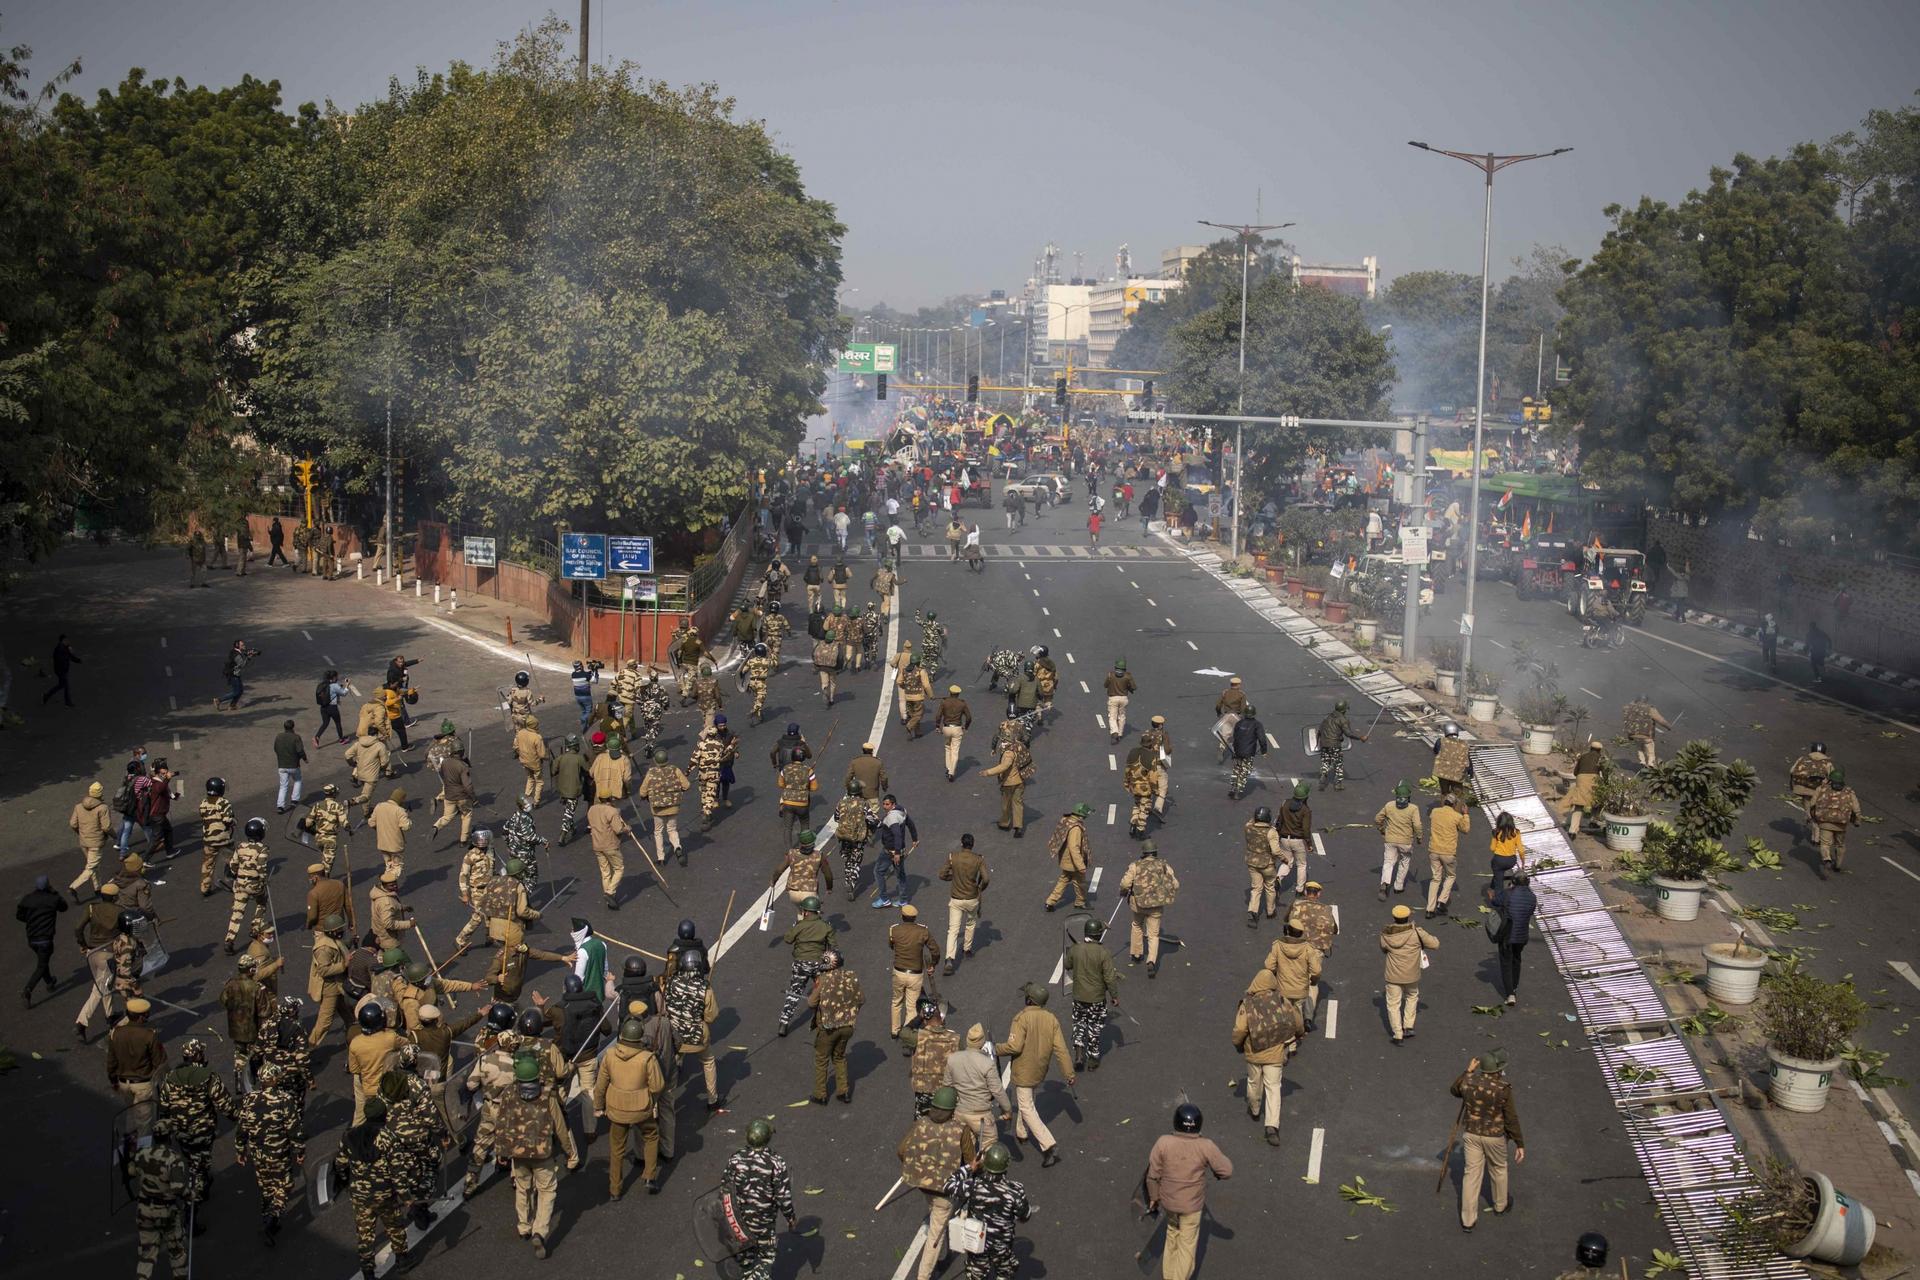 Protesters defied tear gas and stormed the historic Red Fort as India celebrated Republic Day.